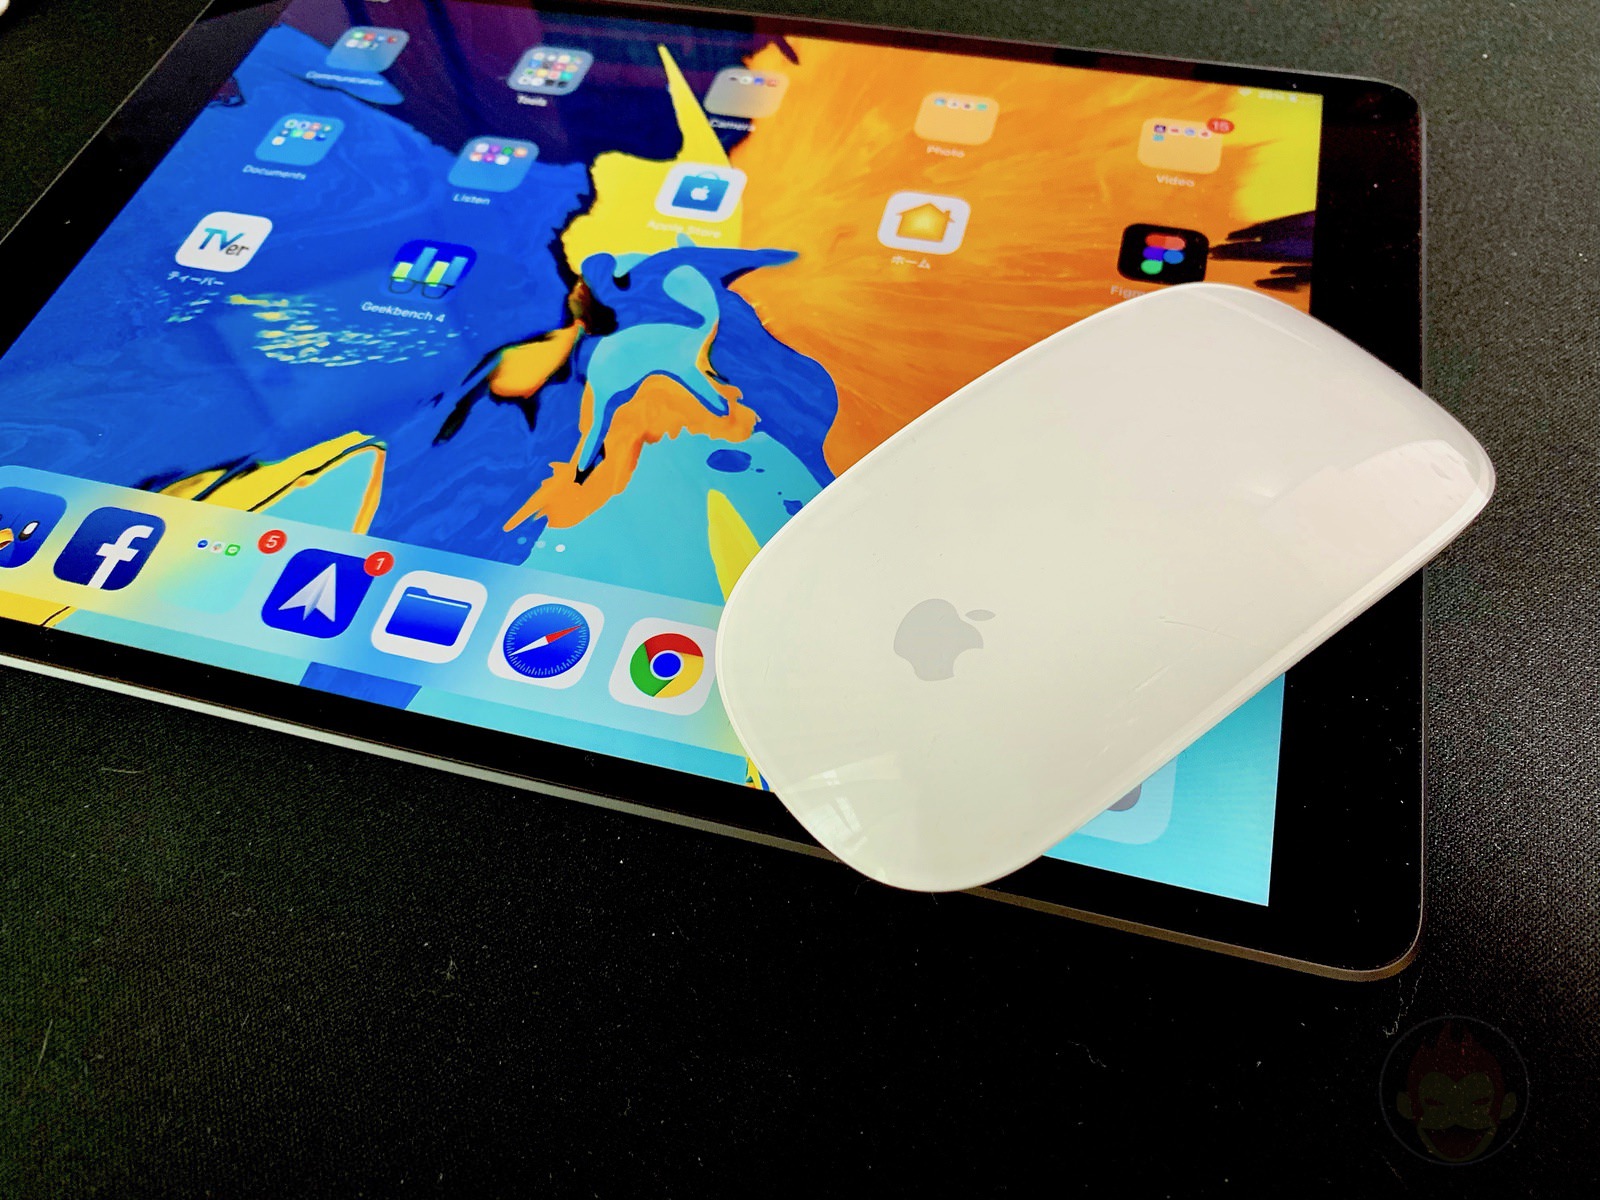 Mouse-Support-Possibly-Coming-to-iPad-01.jpg